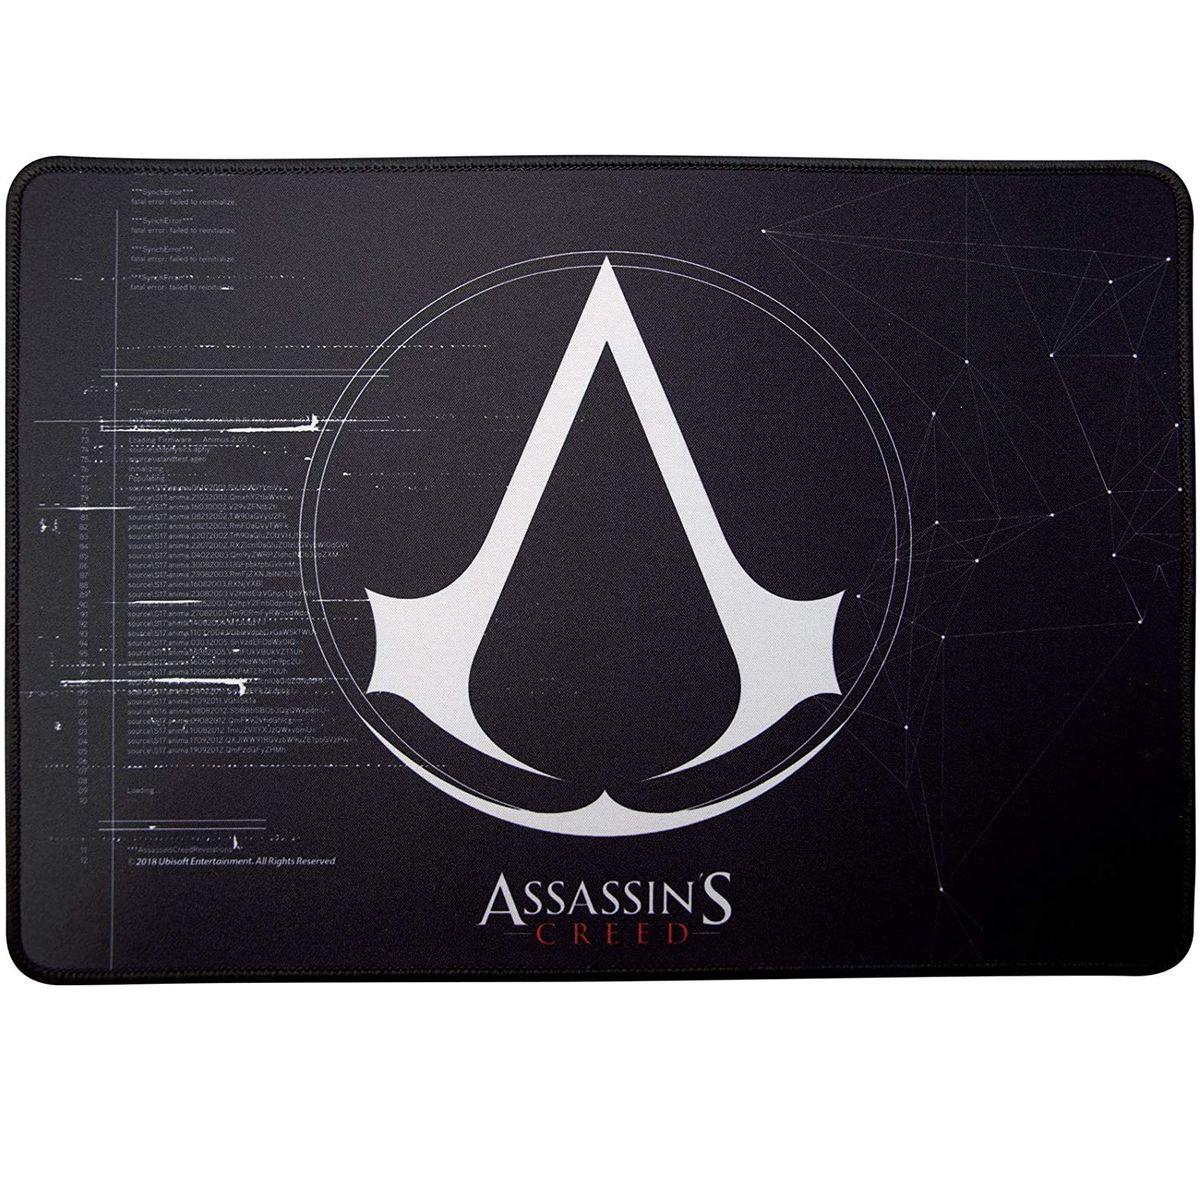 ABYSTYLE Assassin\'s Creed Gaming Mauspad mm) 0 (0 mm x Mauspad